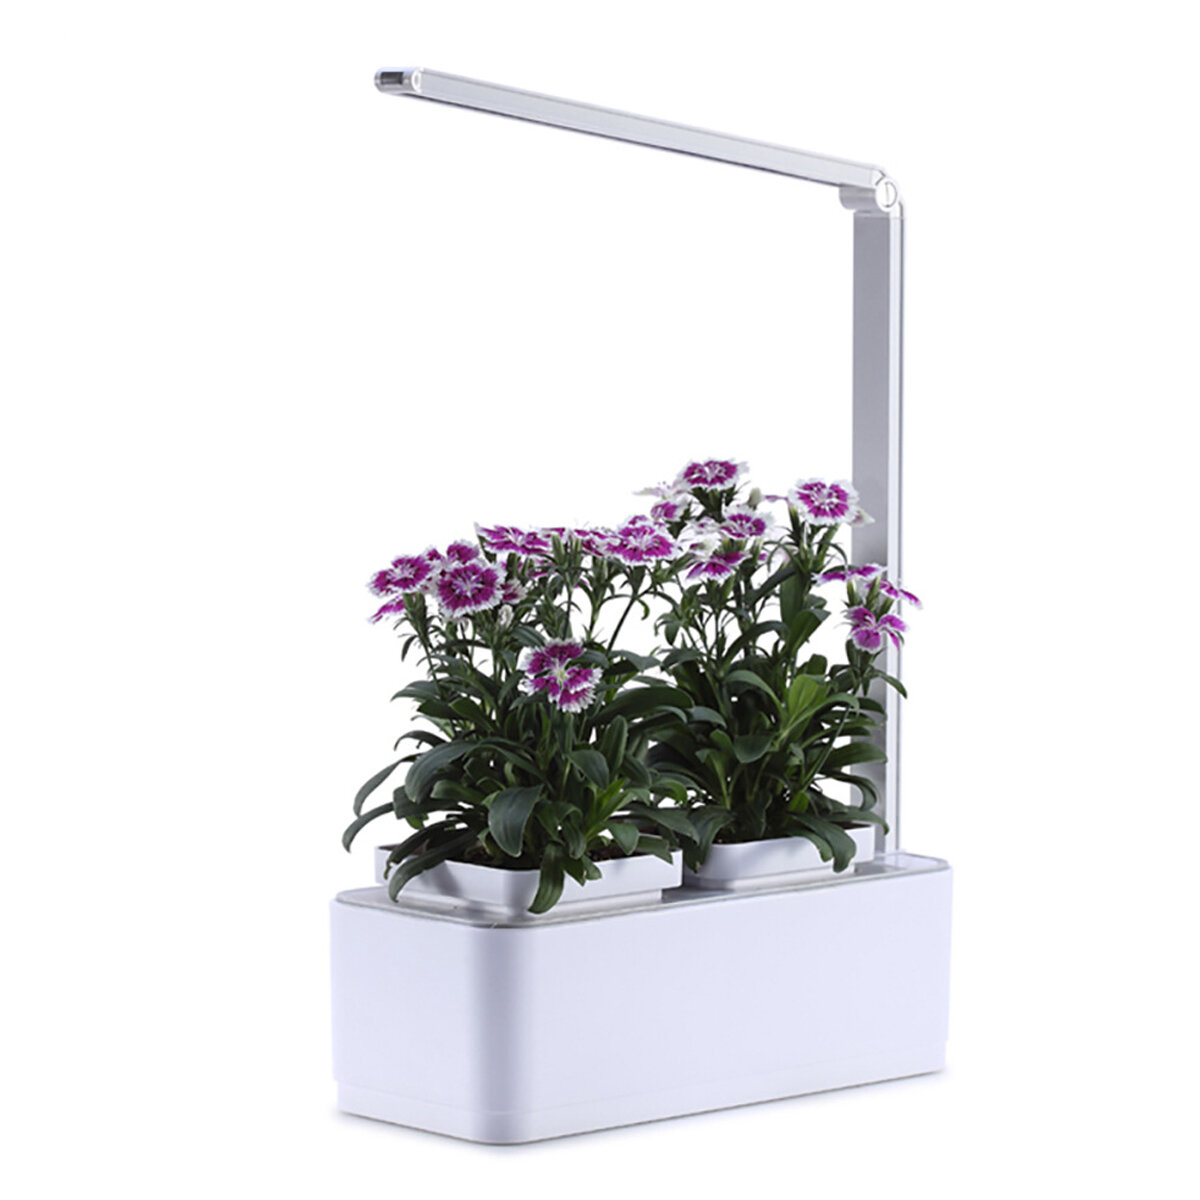 

8W Intelligent Automatic Watering Pot LED Soilless Hydroponic Flower Pot Indoor Plant Growth Lamp Home Decoration